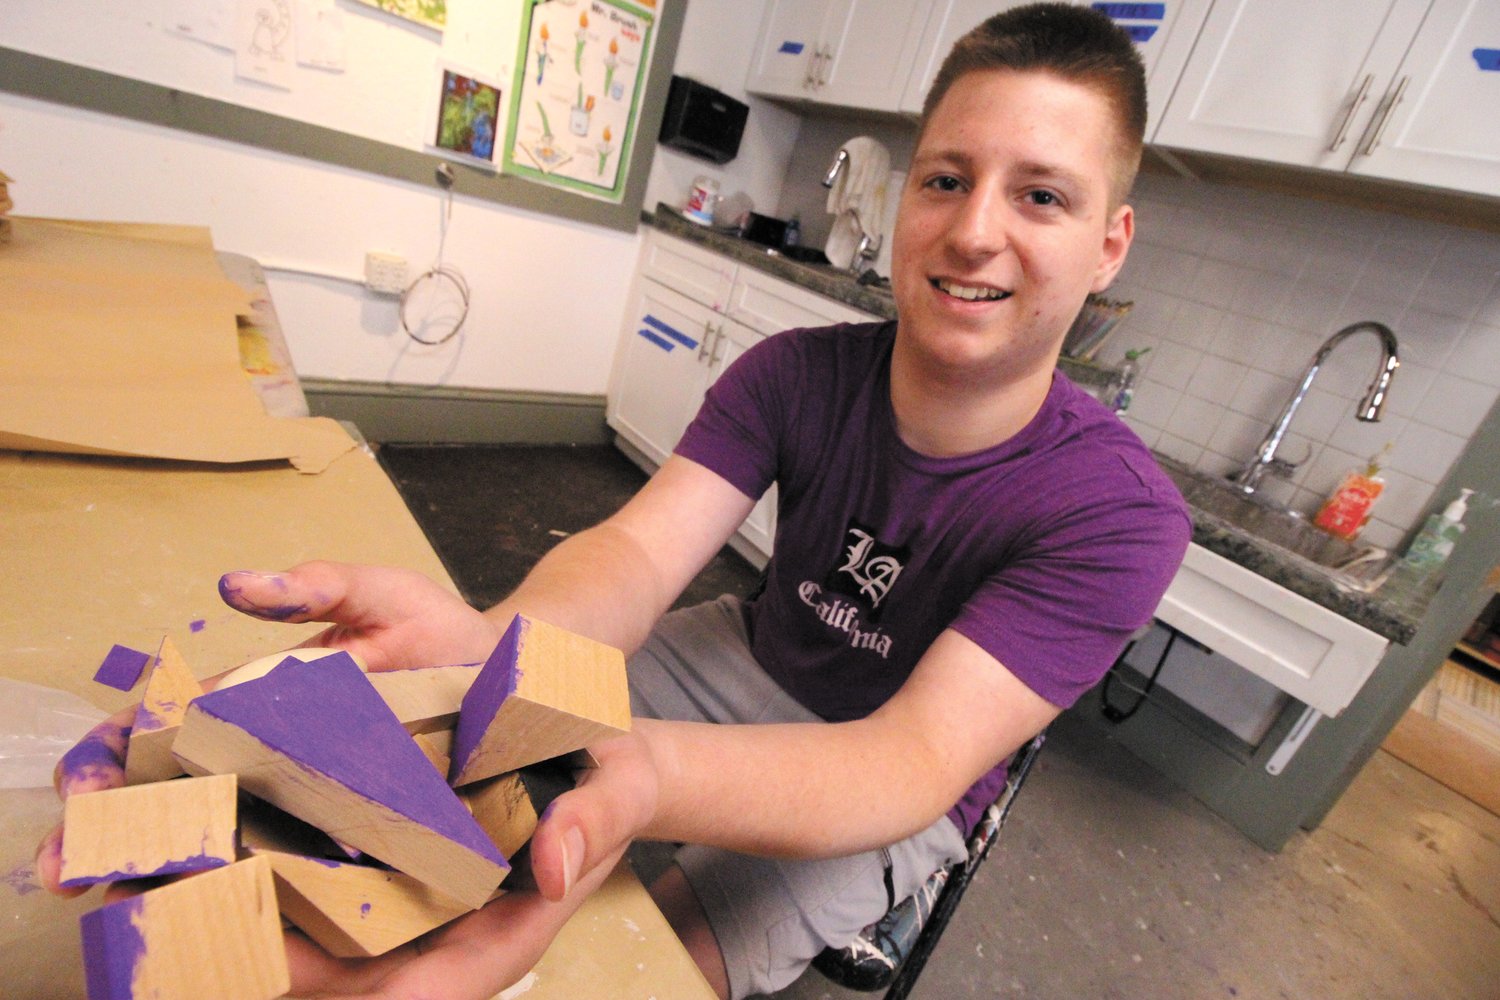 HELPING OUT: Coventry High School student Aiden Petrin has been volunteering at the summer art camp. Last week he assisted by painting one surface on scores of different shaped wooden blocks that campers will use for their projects. The color he picked? Well, purple of course – it’s is favorite.